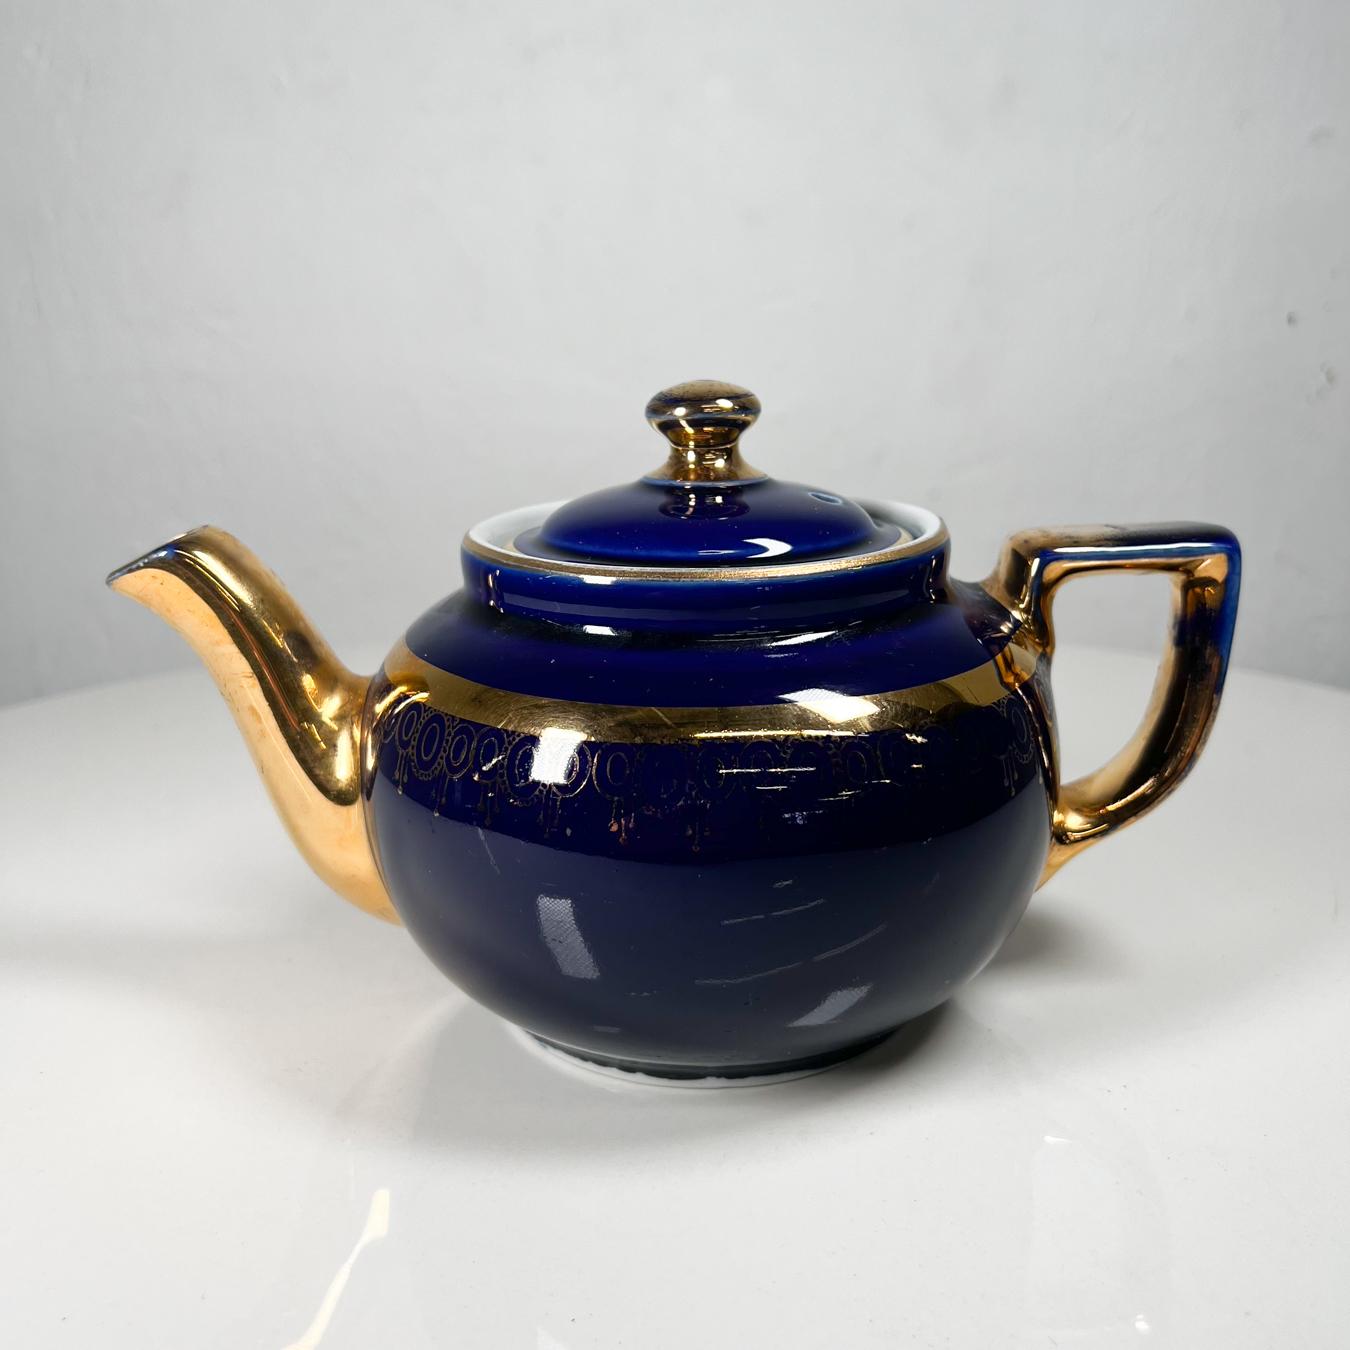 Vintage Modern decorative cobalt blue and gold hall China tea pot.
Stamped 4 cup USA
Measures: 8.63 wide x 5.25 deep x 5 tall
Preowned vintage condition.
Some areas are faded due to vintage wear. No nicks. Lovely presentation.
Review images